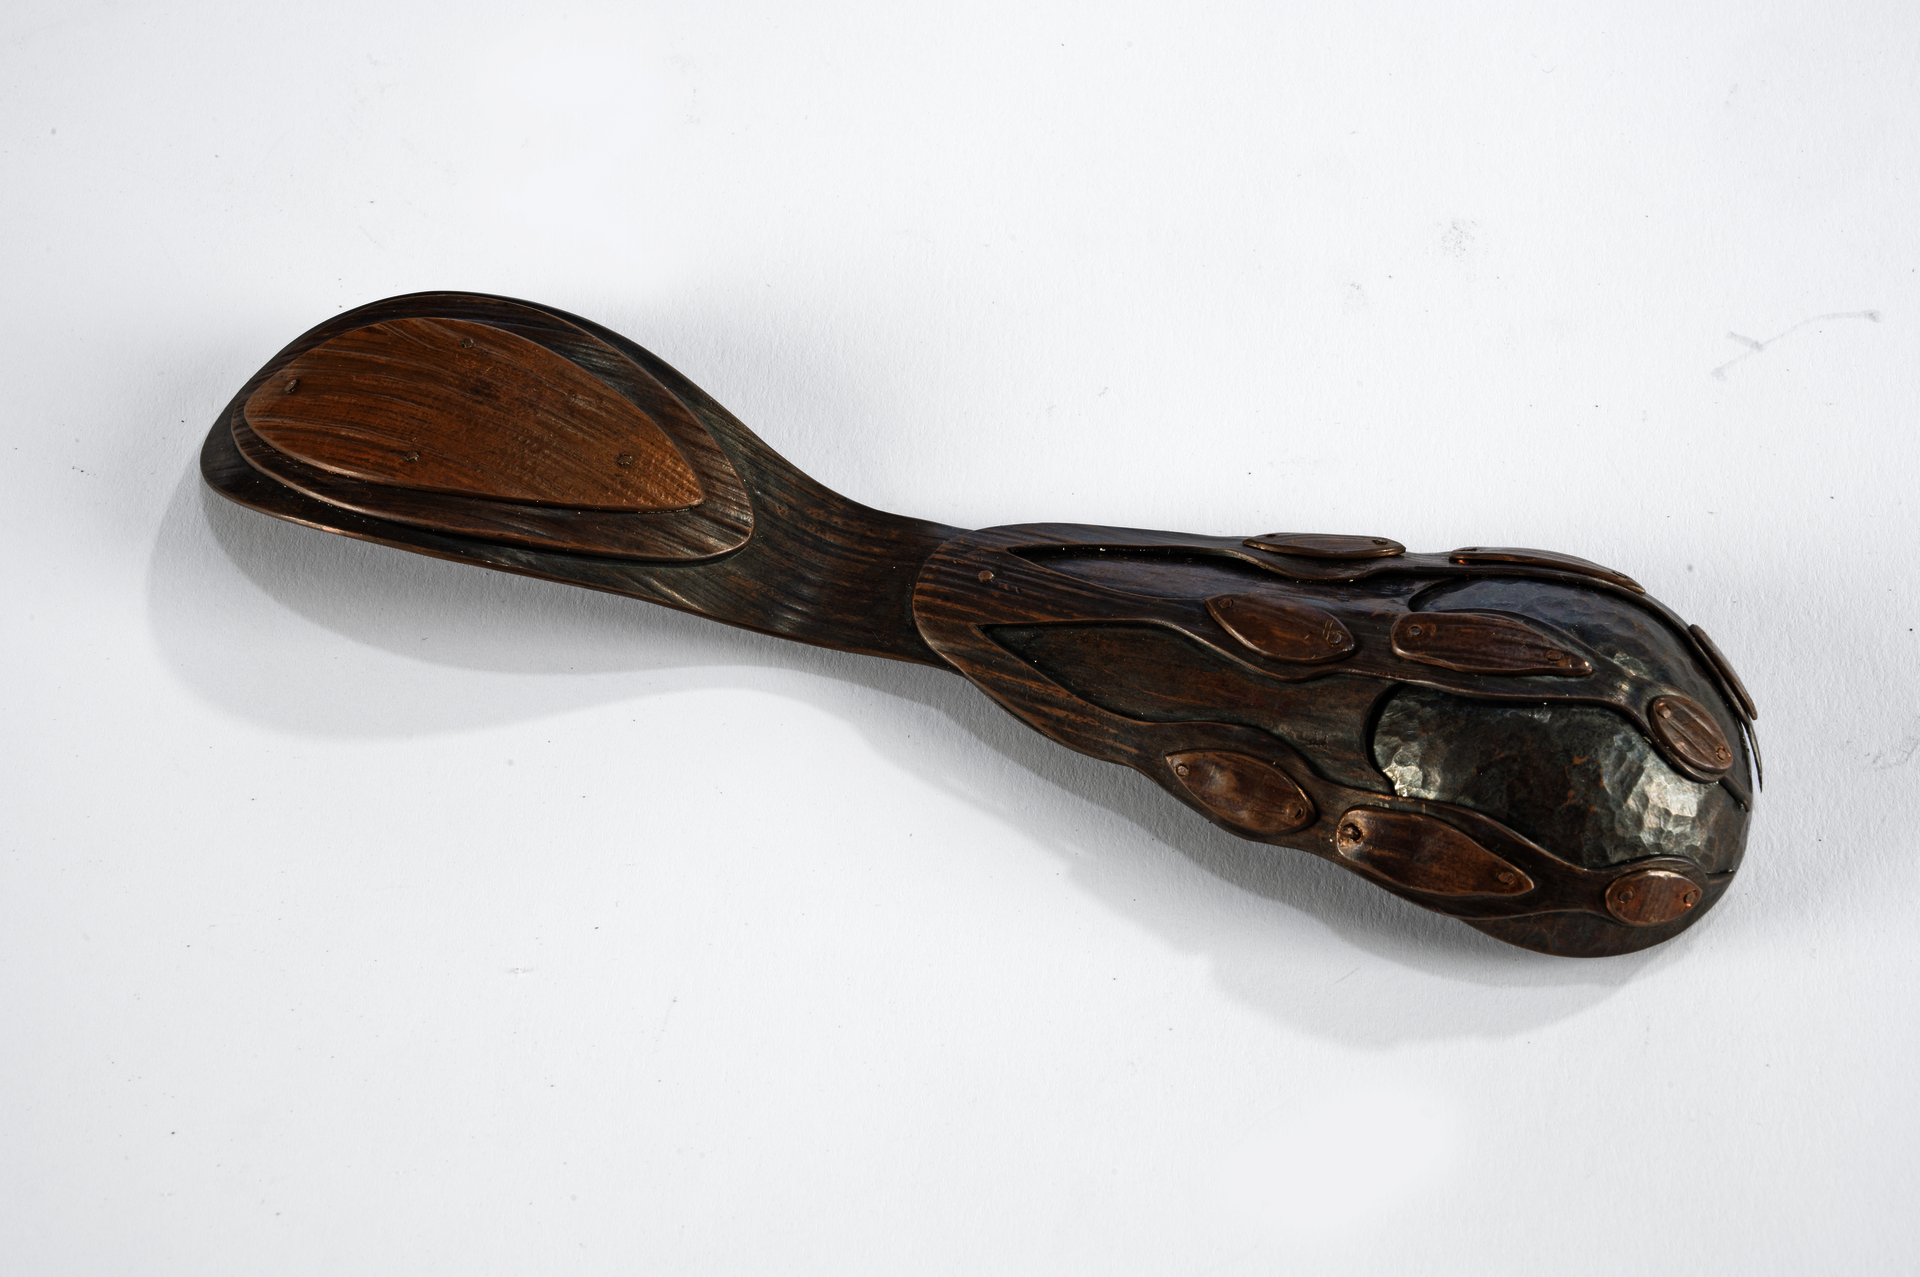 A spoon viewed from the underside made of copper with wood grain texture. Sheets of copper are cut, formed, stacked, and riveted together to look like a claw-and-ball chair foot